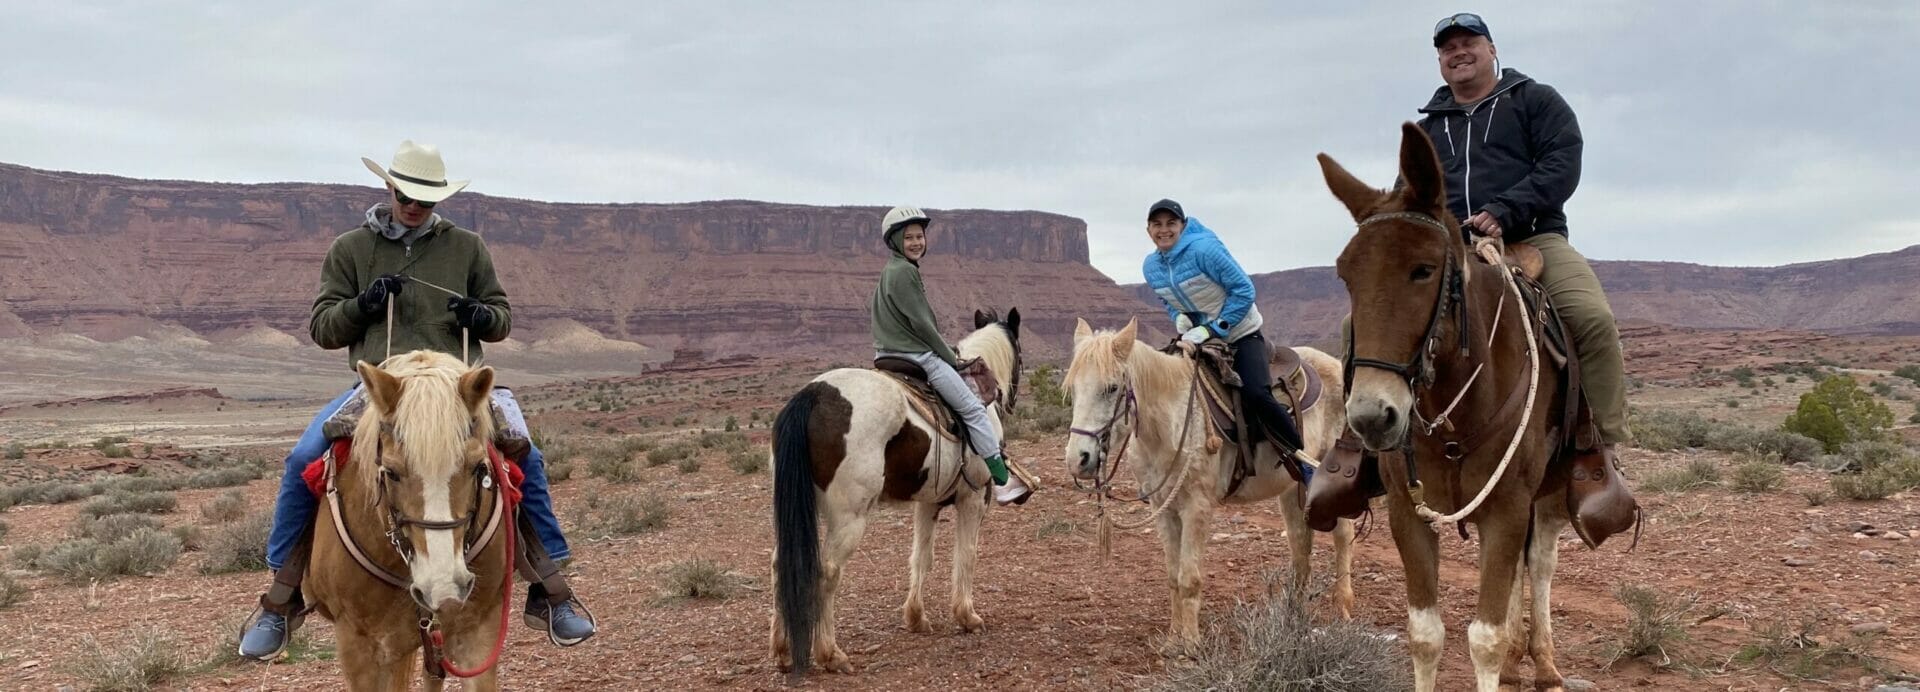 Horse back riding at the Grand Canyon - Sending Your Child Off to College